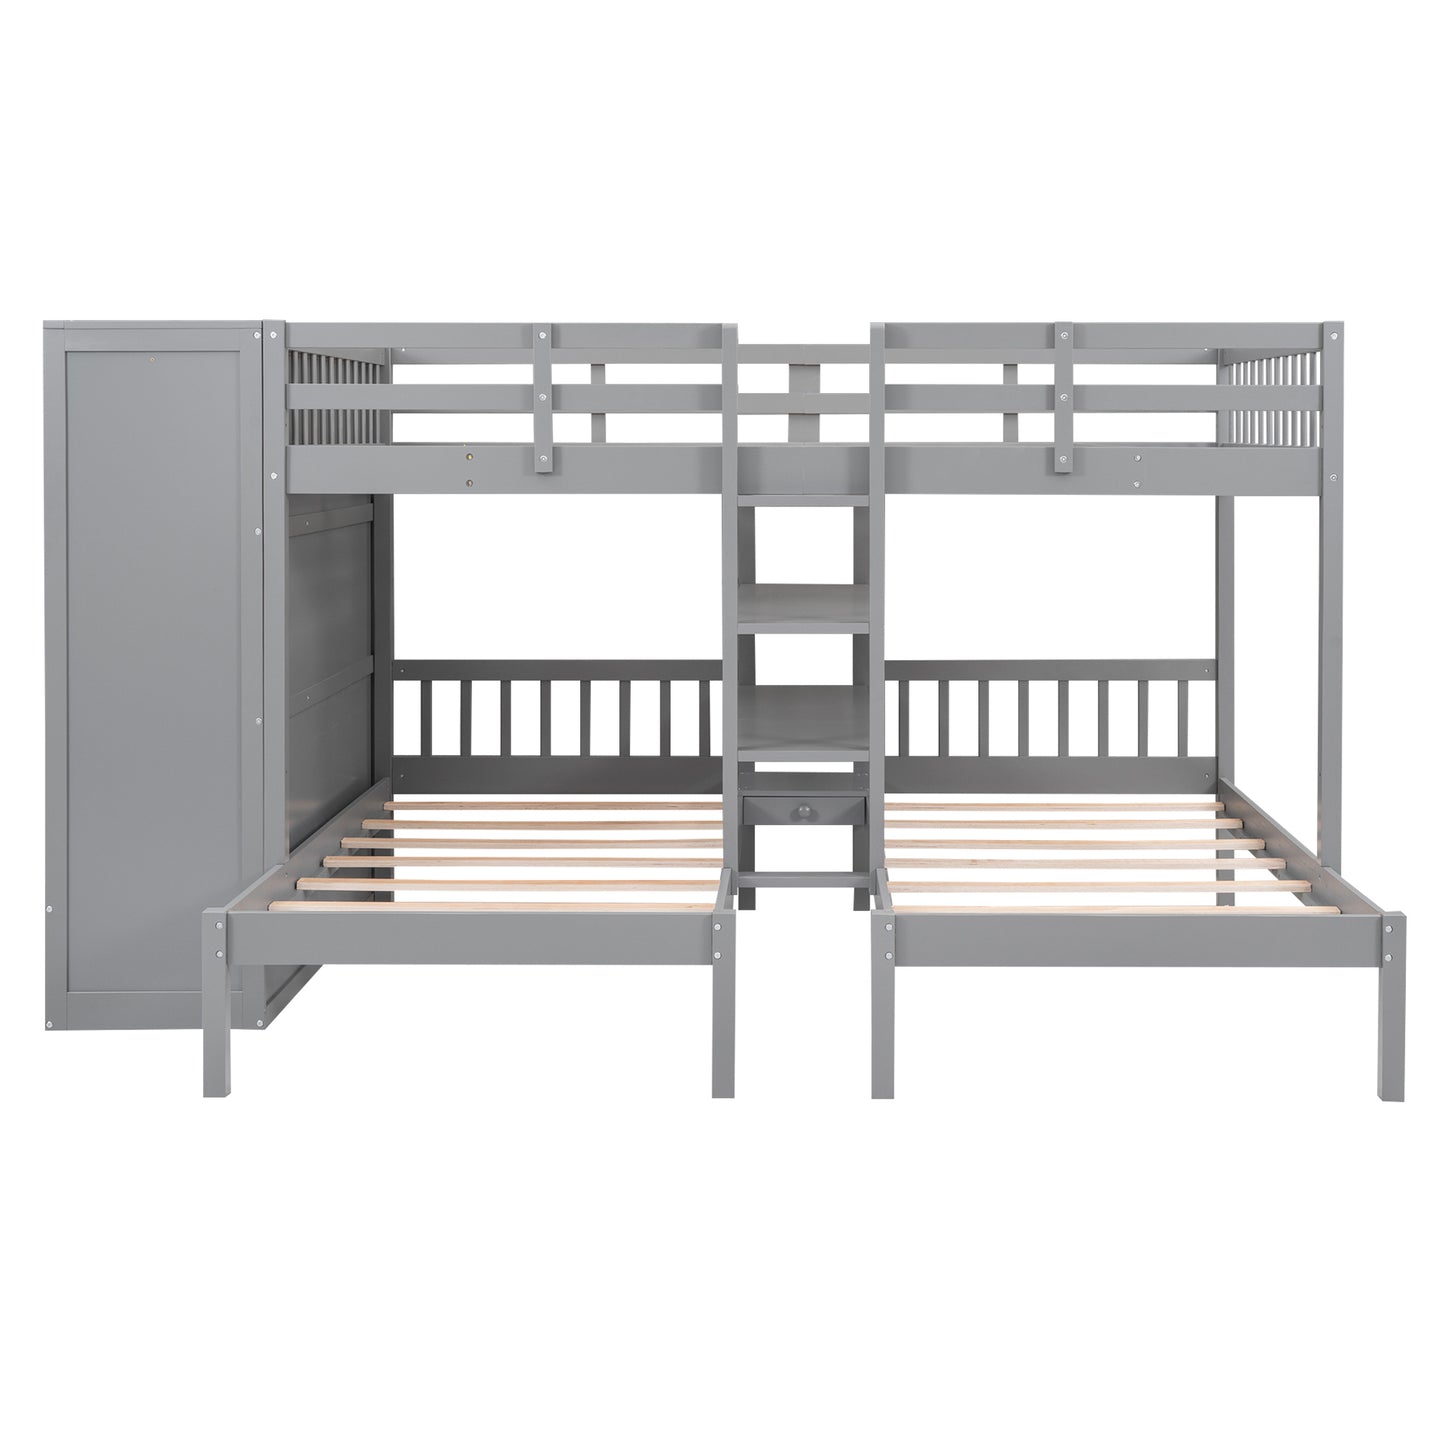 Full-Over-Twin-Twin Bunk Bed with Shelves, Wardrobe and Mirror, Gray